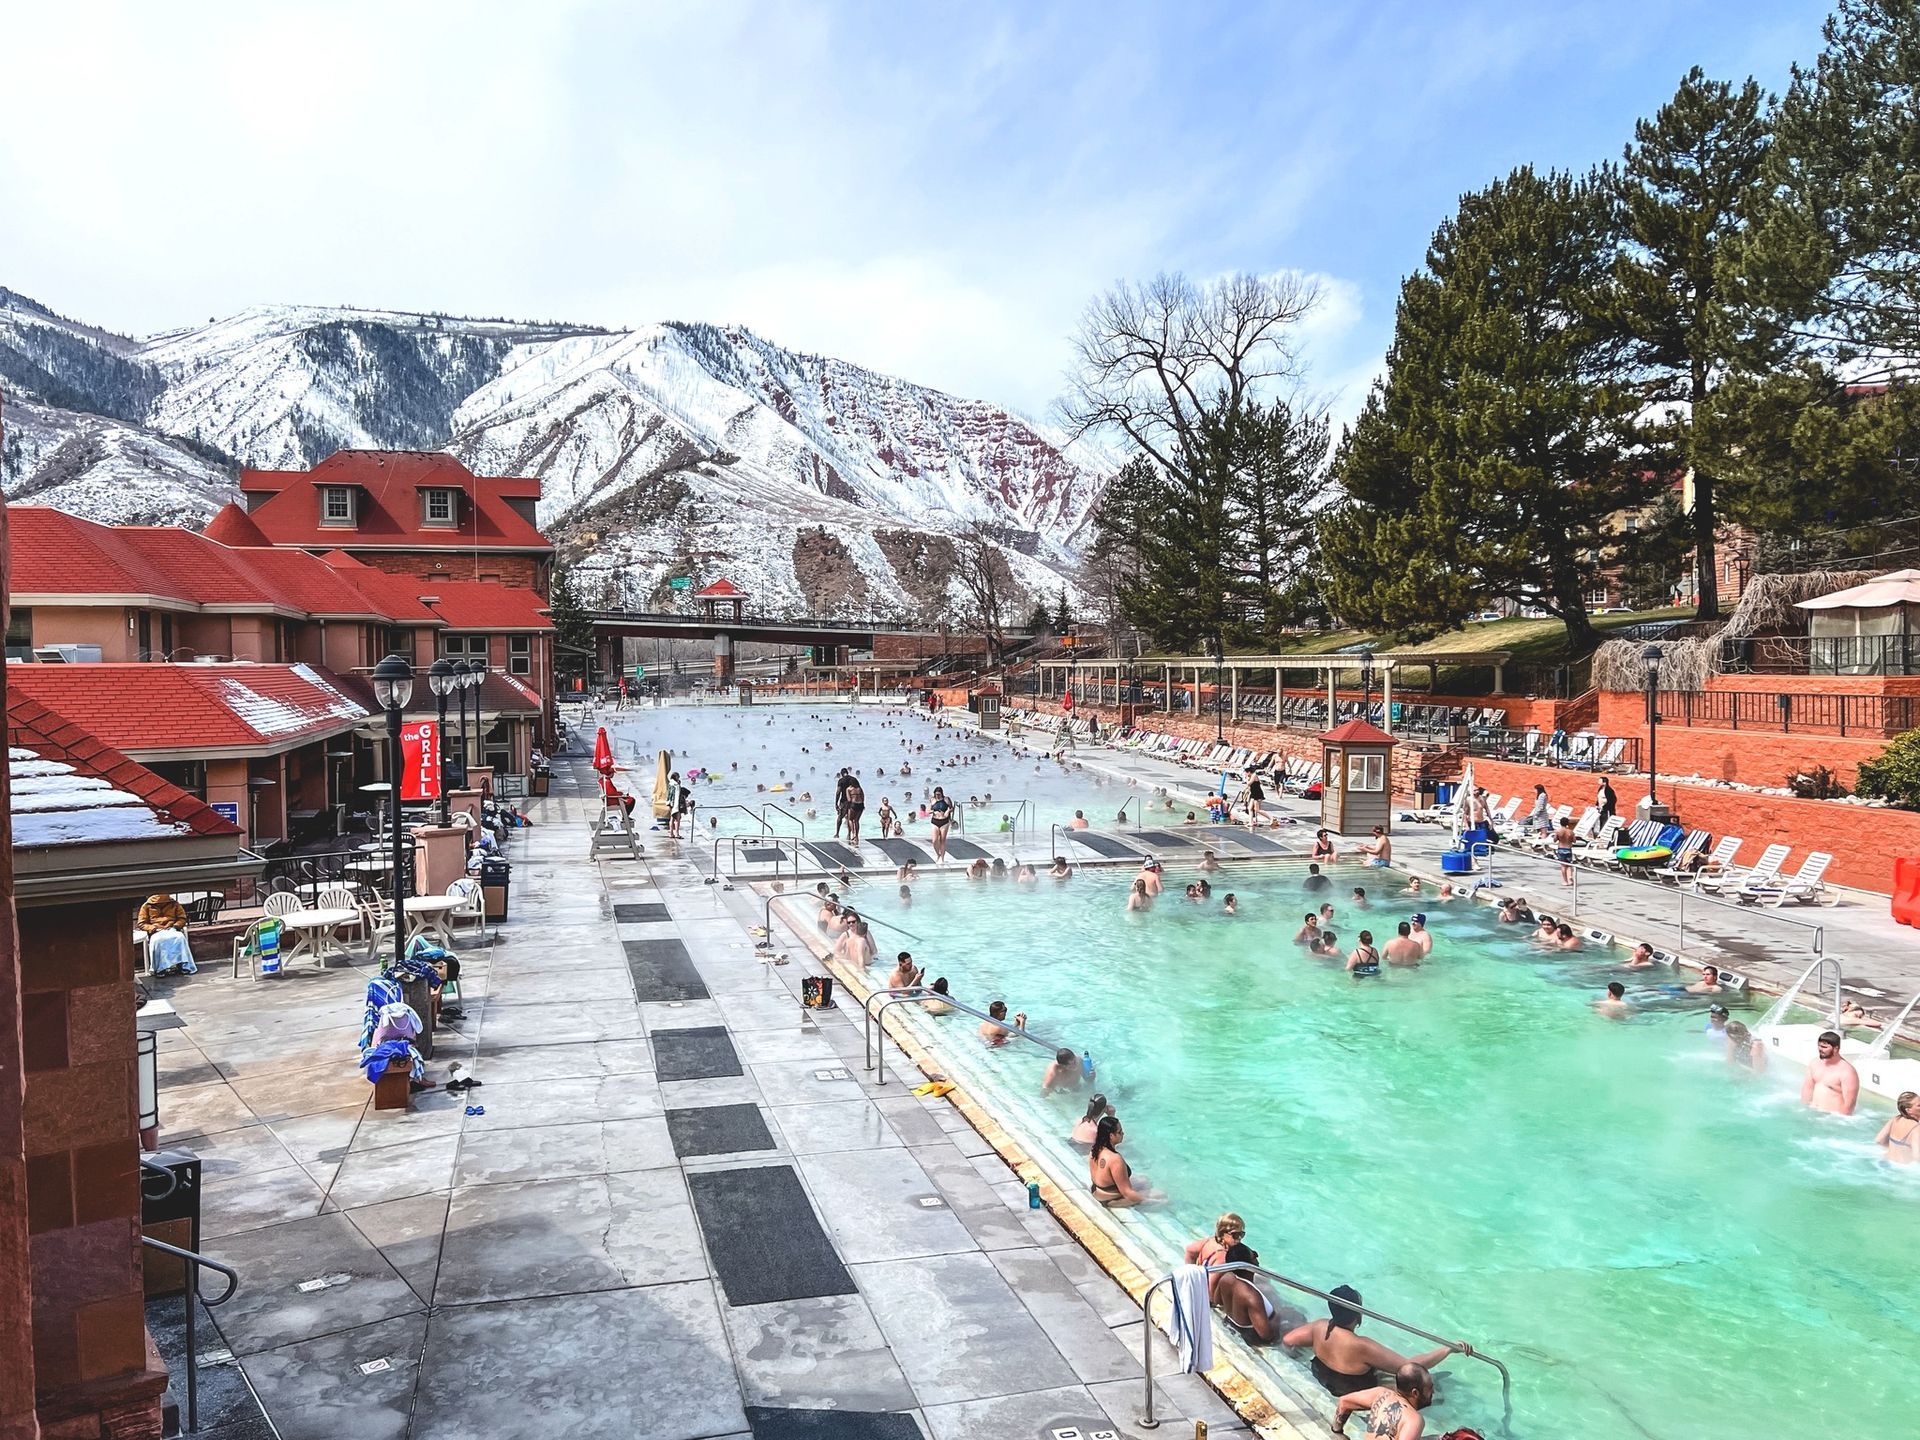 World's Largest Mineral Hot Springs Pool: world record in Glenwood Springs, Colorado